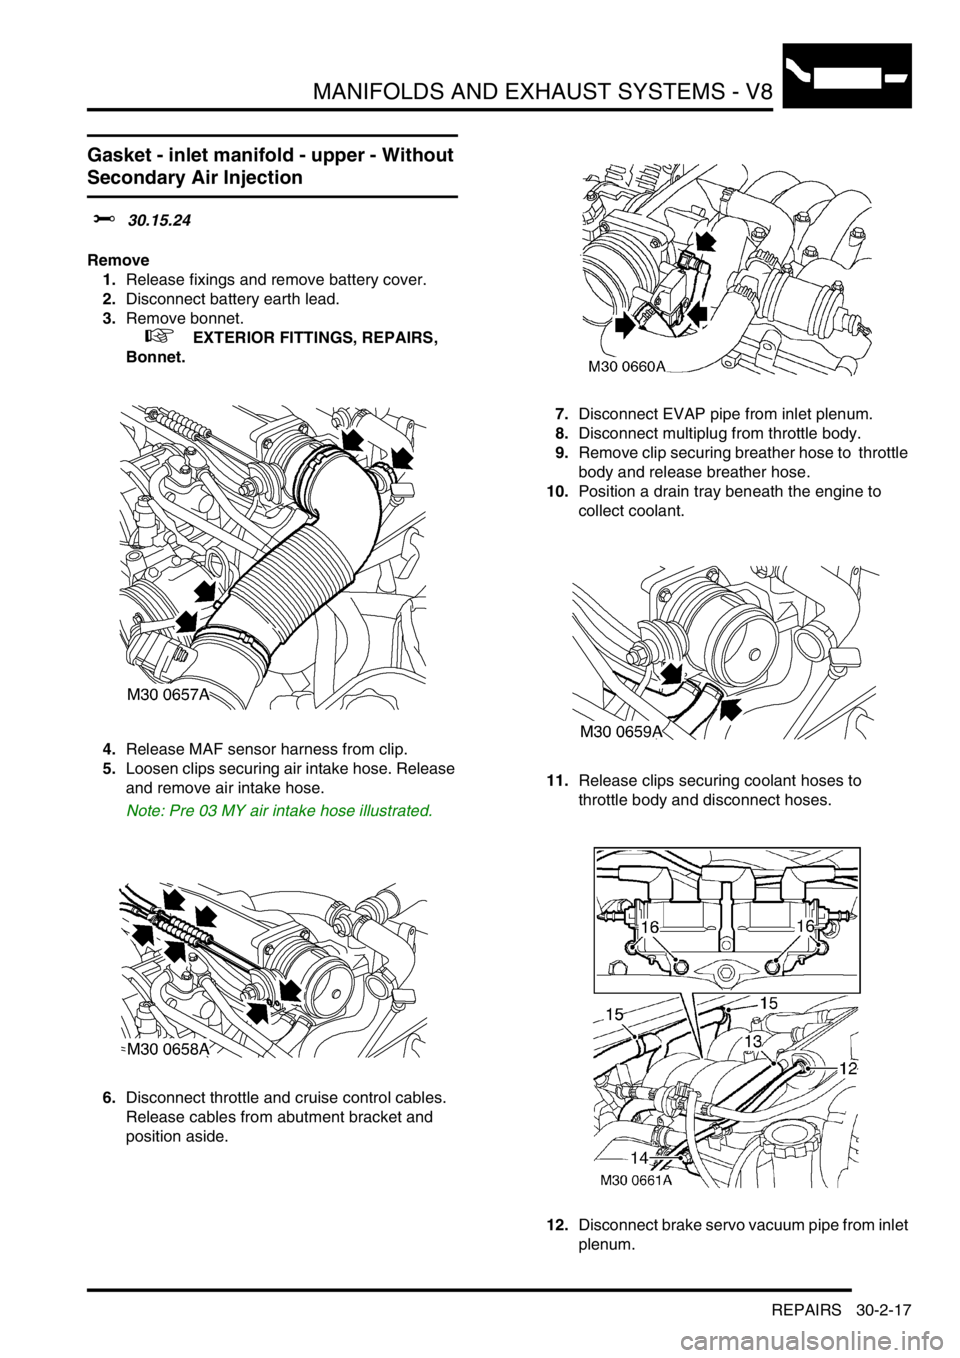 LAND ROVER DISCOVERY 2002 User Guide MANIFOLDS AND EXHAUST SYSTEMS - V8
REPAIRS 30-2-17
Gasket - inlet manifold - upper - Without 
Secondary Air Injection
$% 30.15.24 
Remove
1.Release fixings and remove battery cover. 
2.Disconnect batt